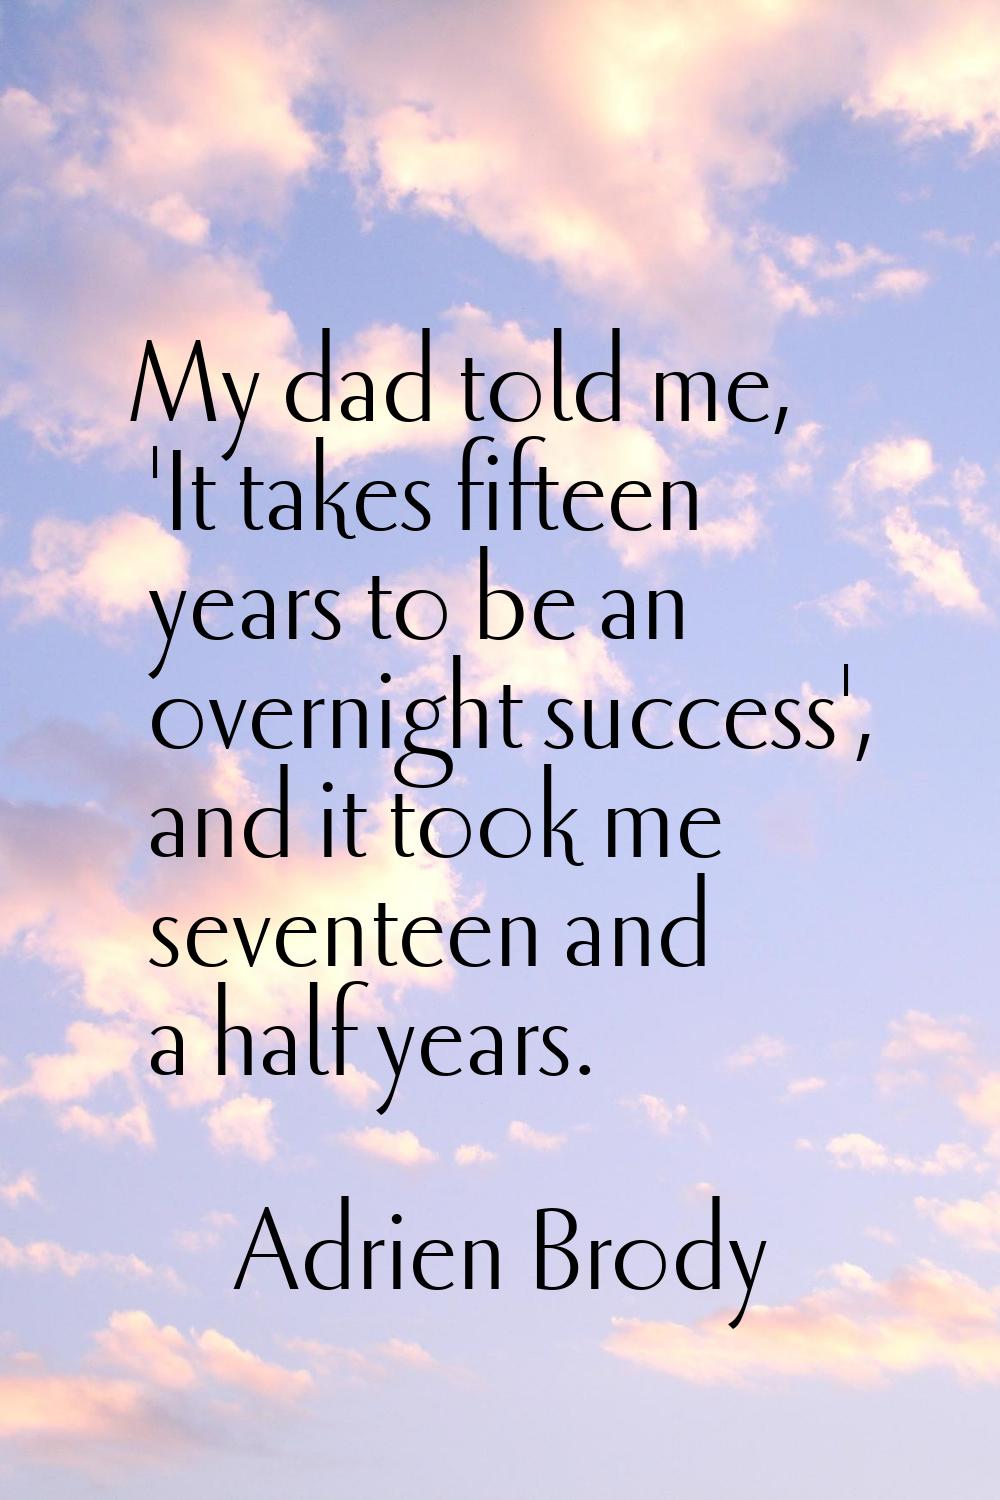 My dad told me, 'It takes fifteen years to be an overnight success', and it took me seventeen and a